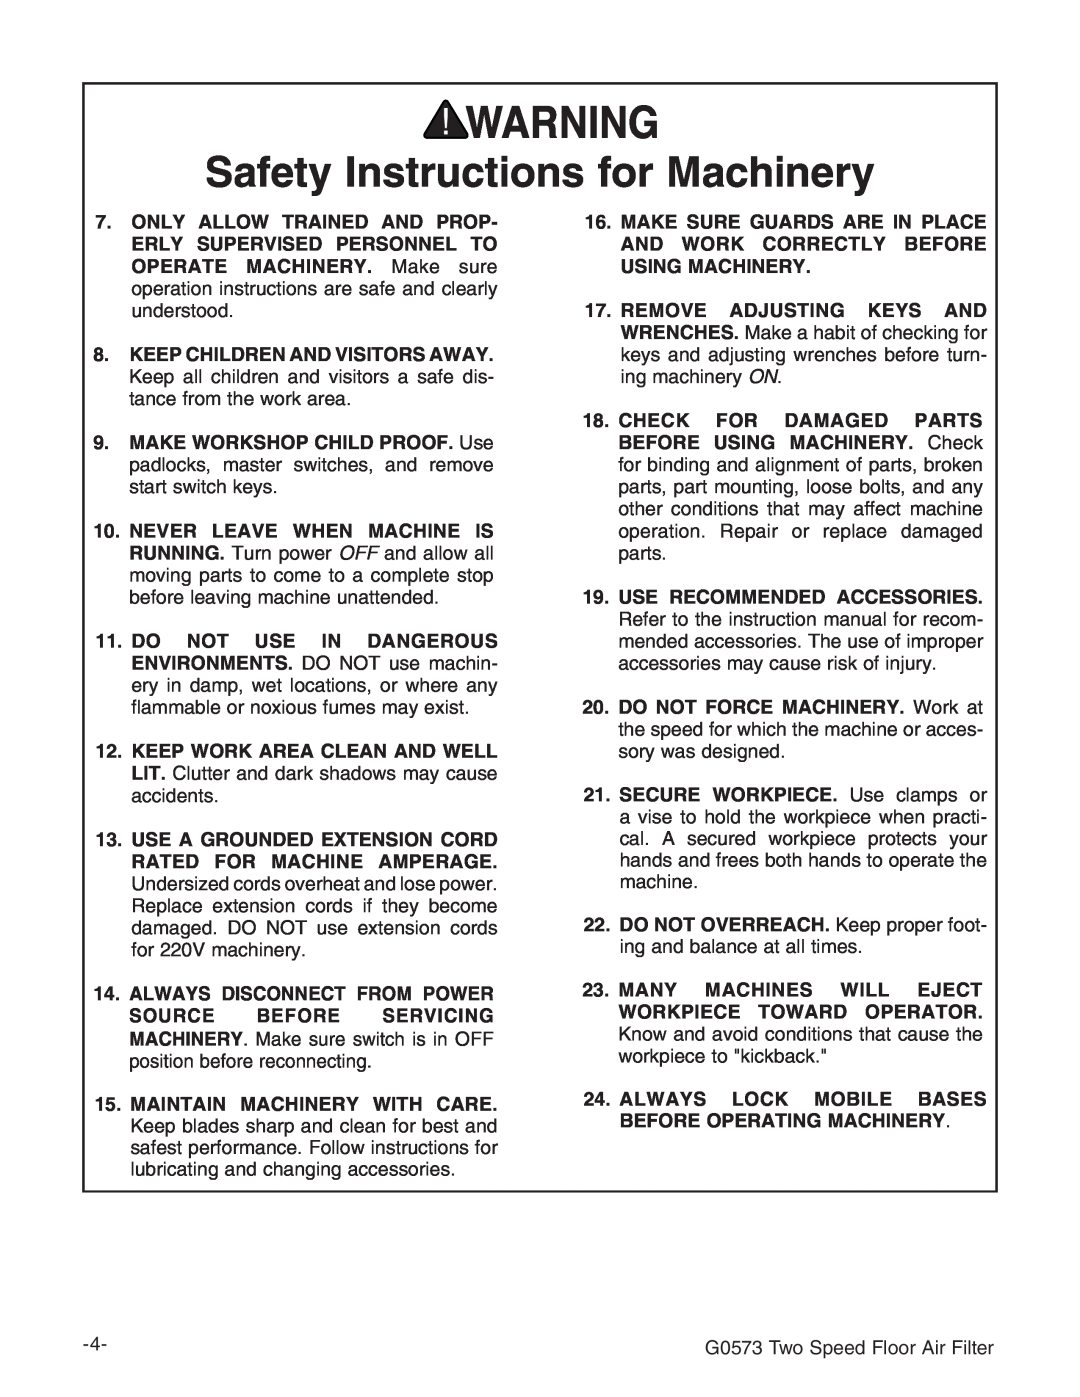 Grizzly instruction manual Safety Instructions for Machinery, G0573 Two Speed Floor Air Filter 